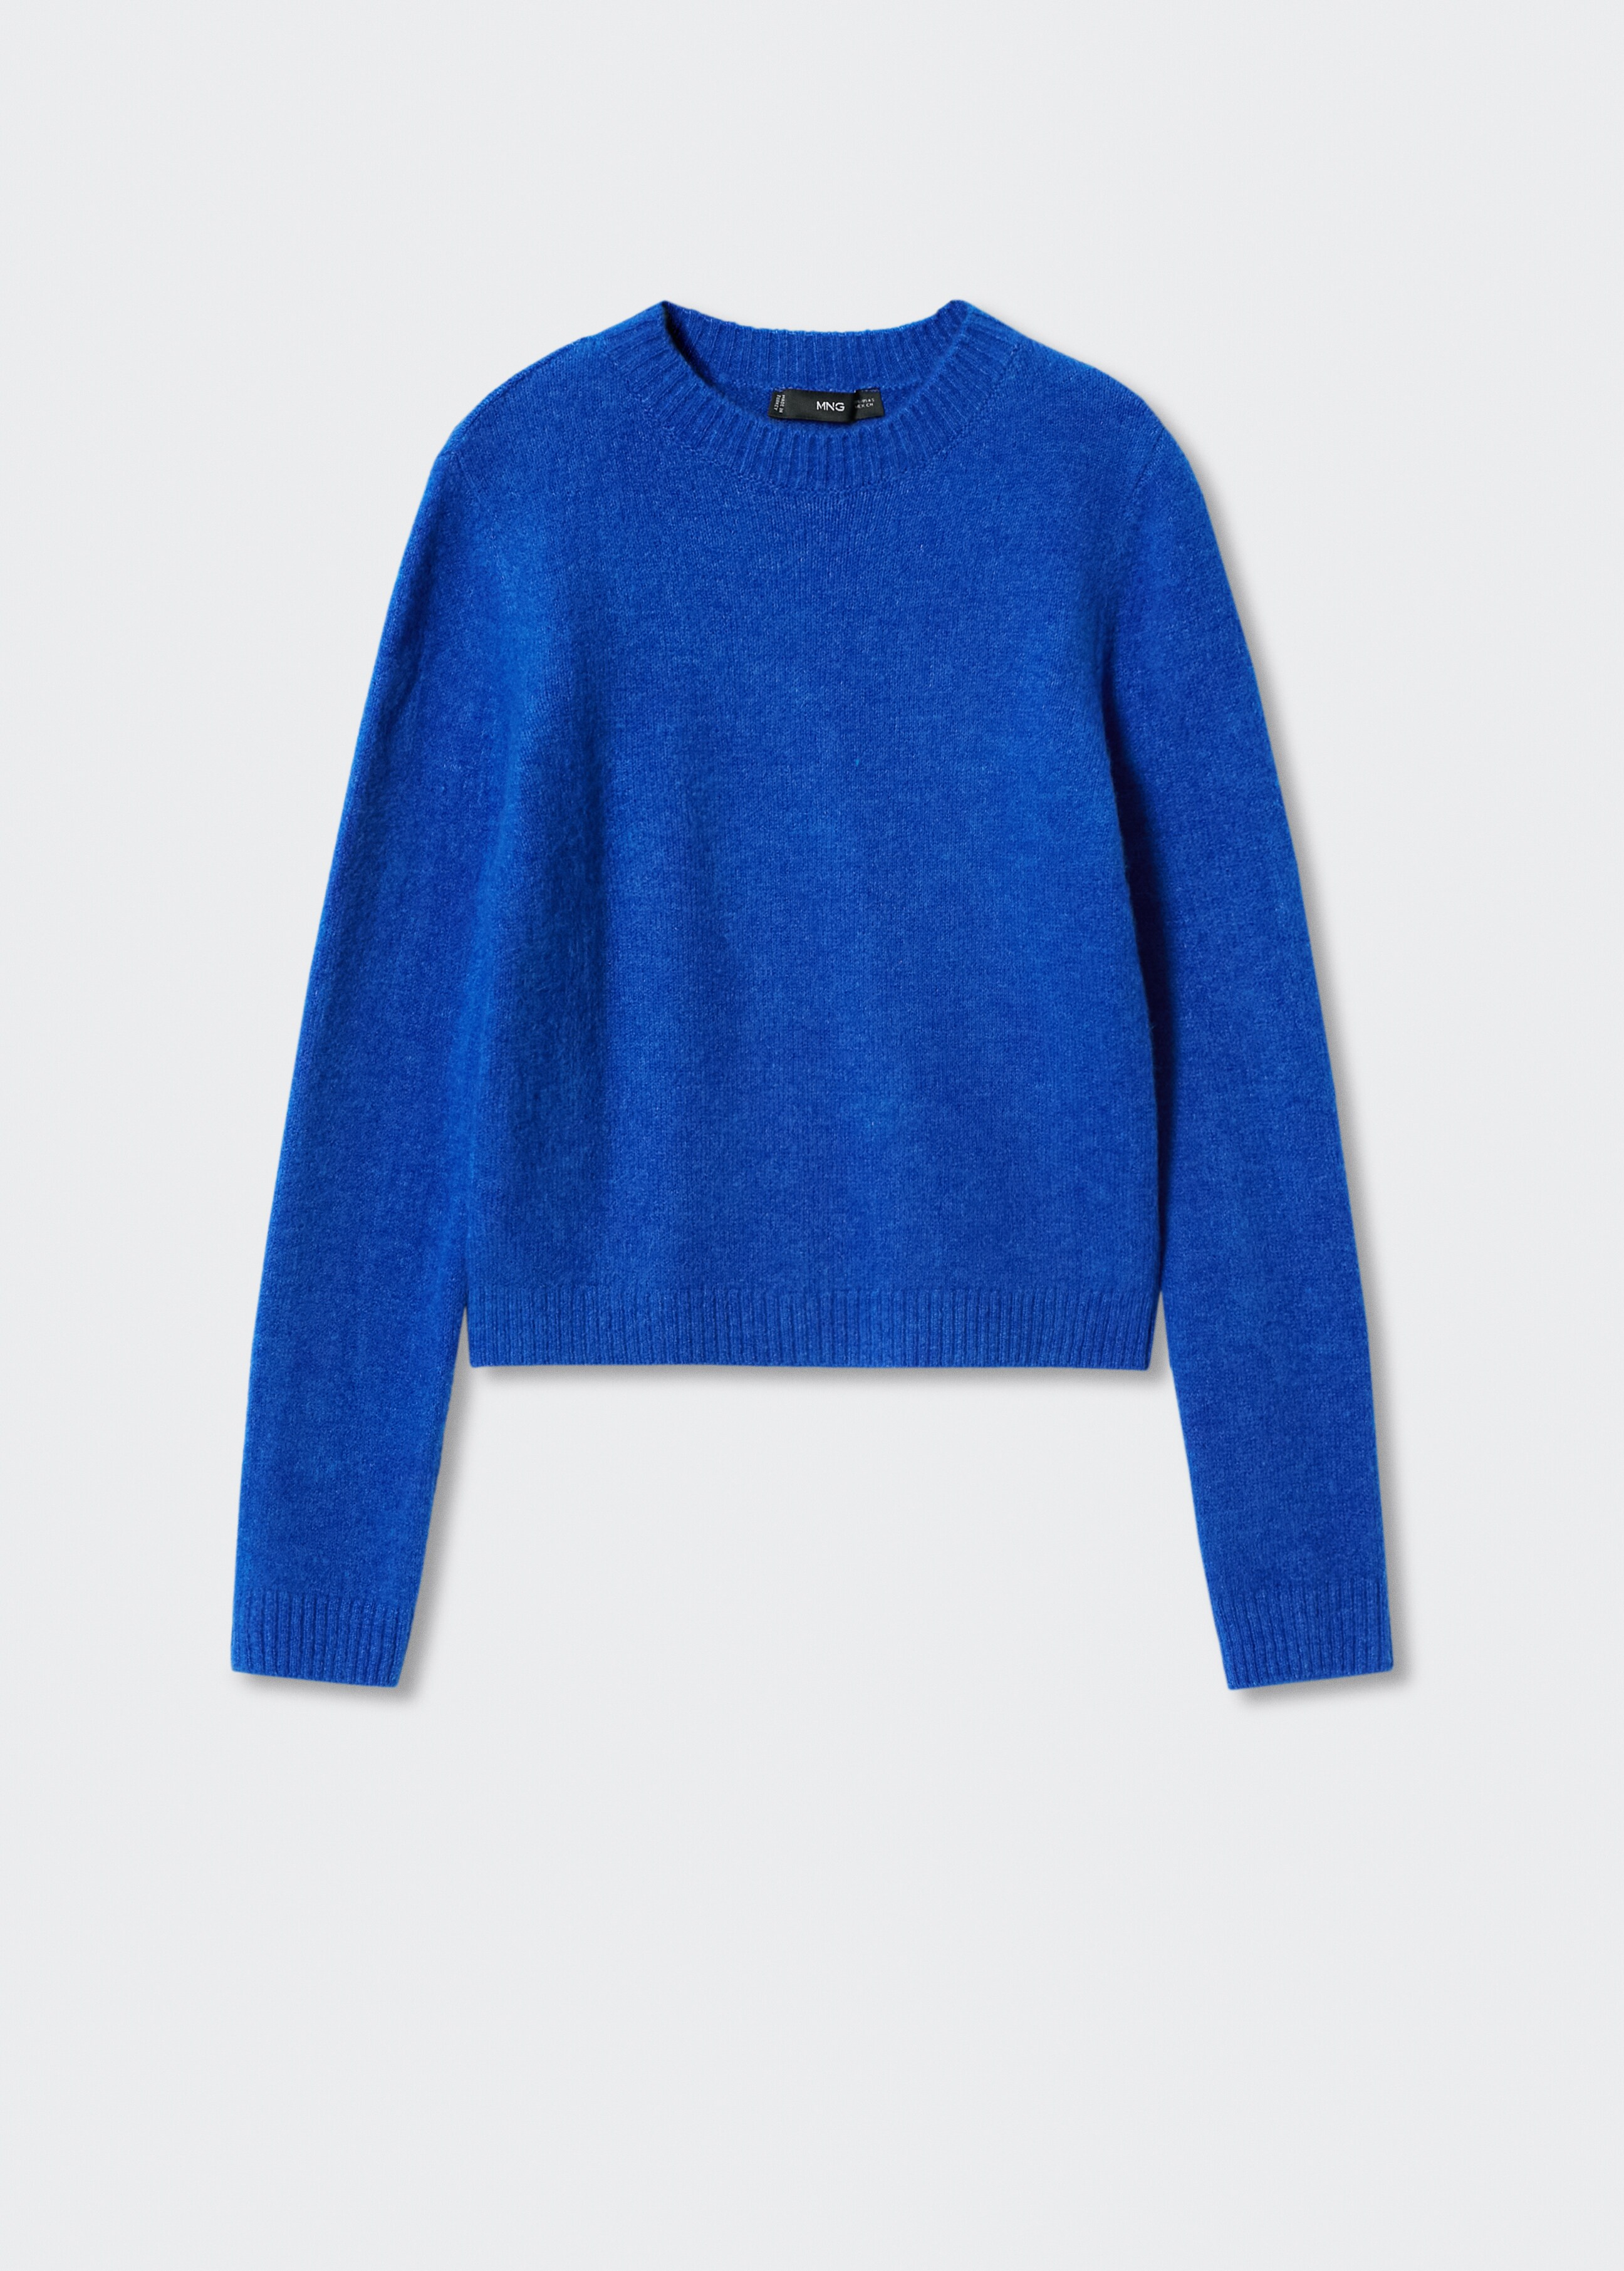 Cotton-linen round-neck knitted sweater